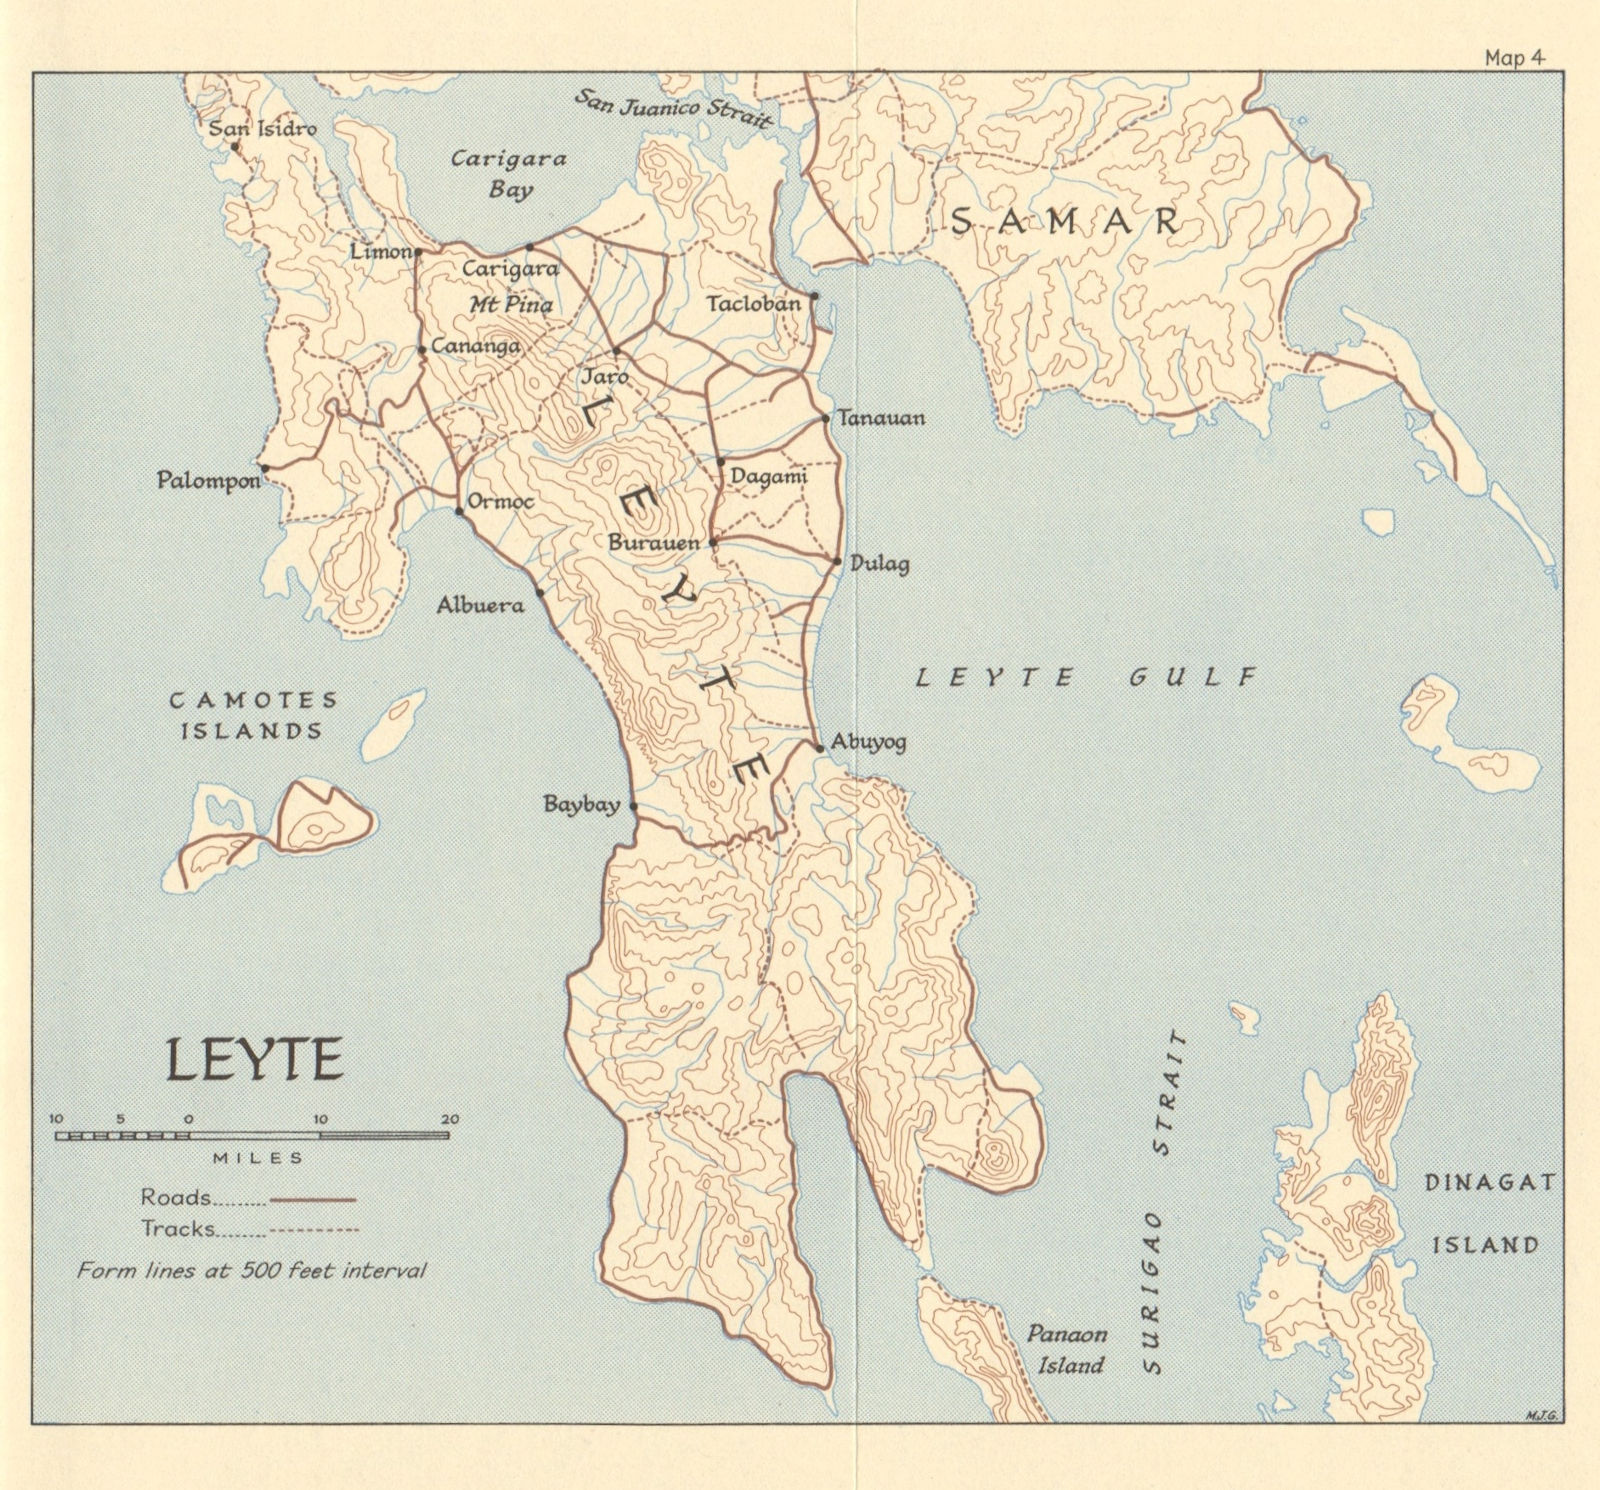 Leyte. Battle of Leyte Gulf October 1944. Philippines World War Two 1965 map